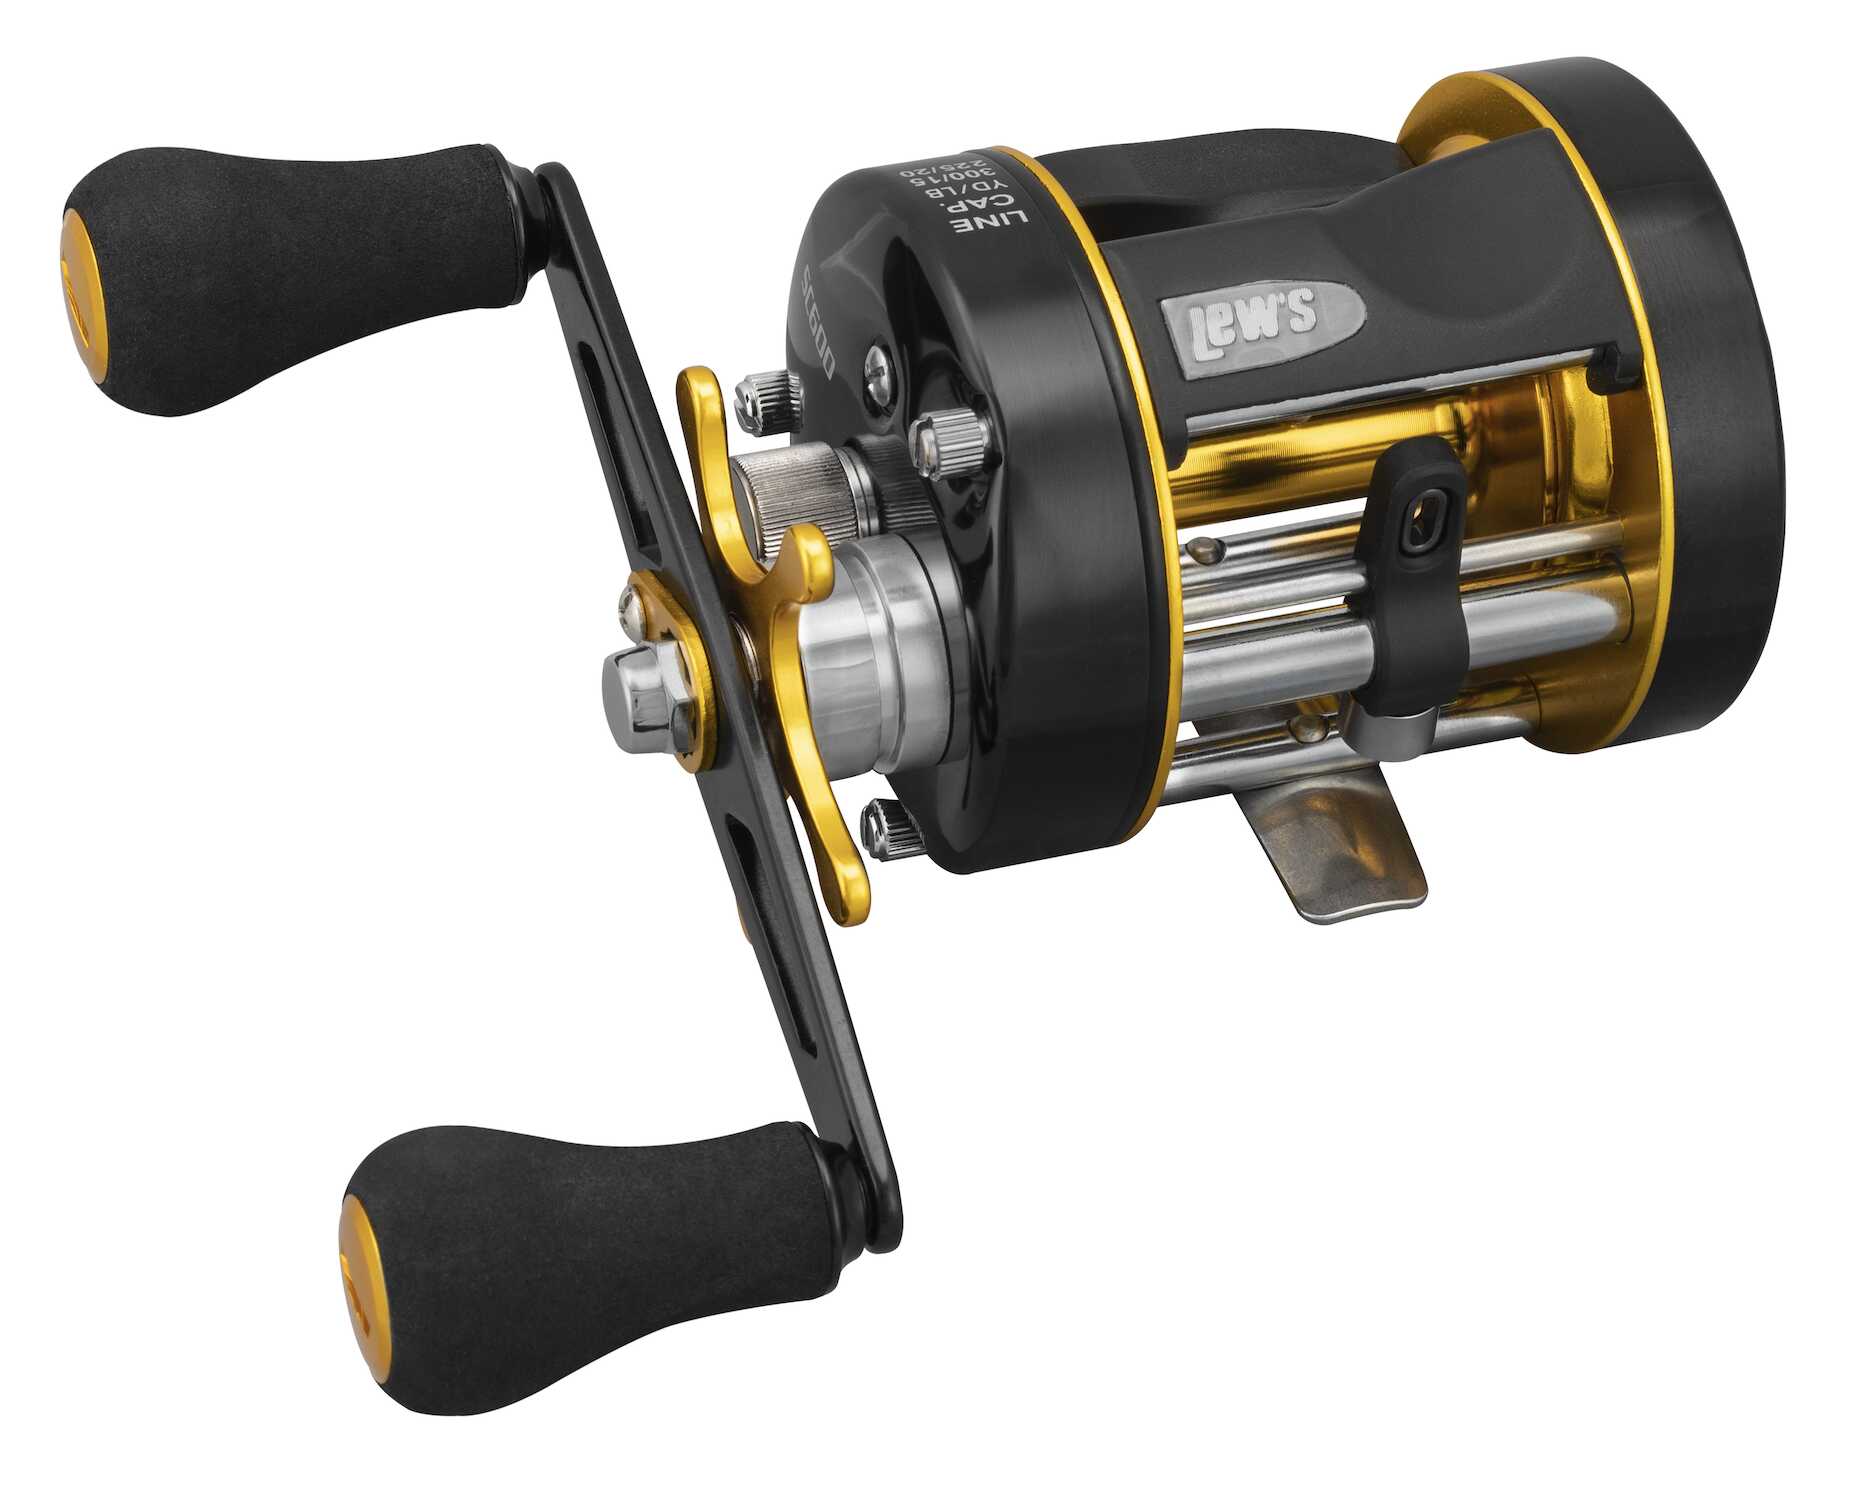 Wally Marshall Signature Series Crappie Reel